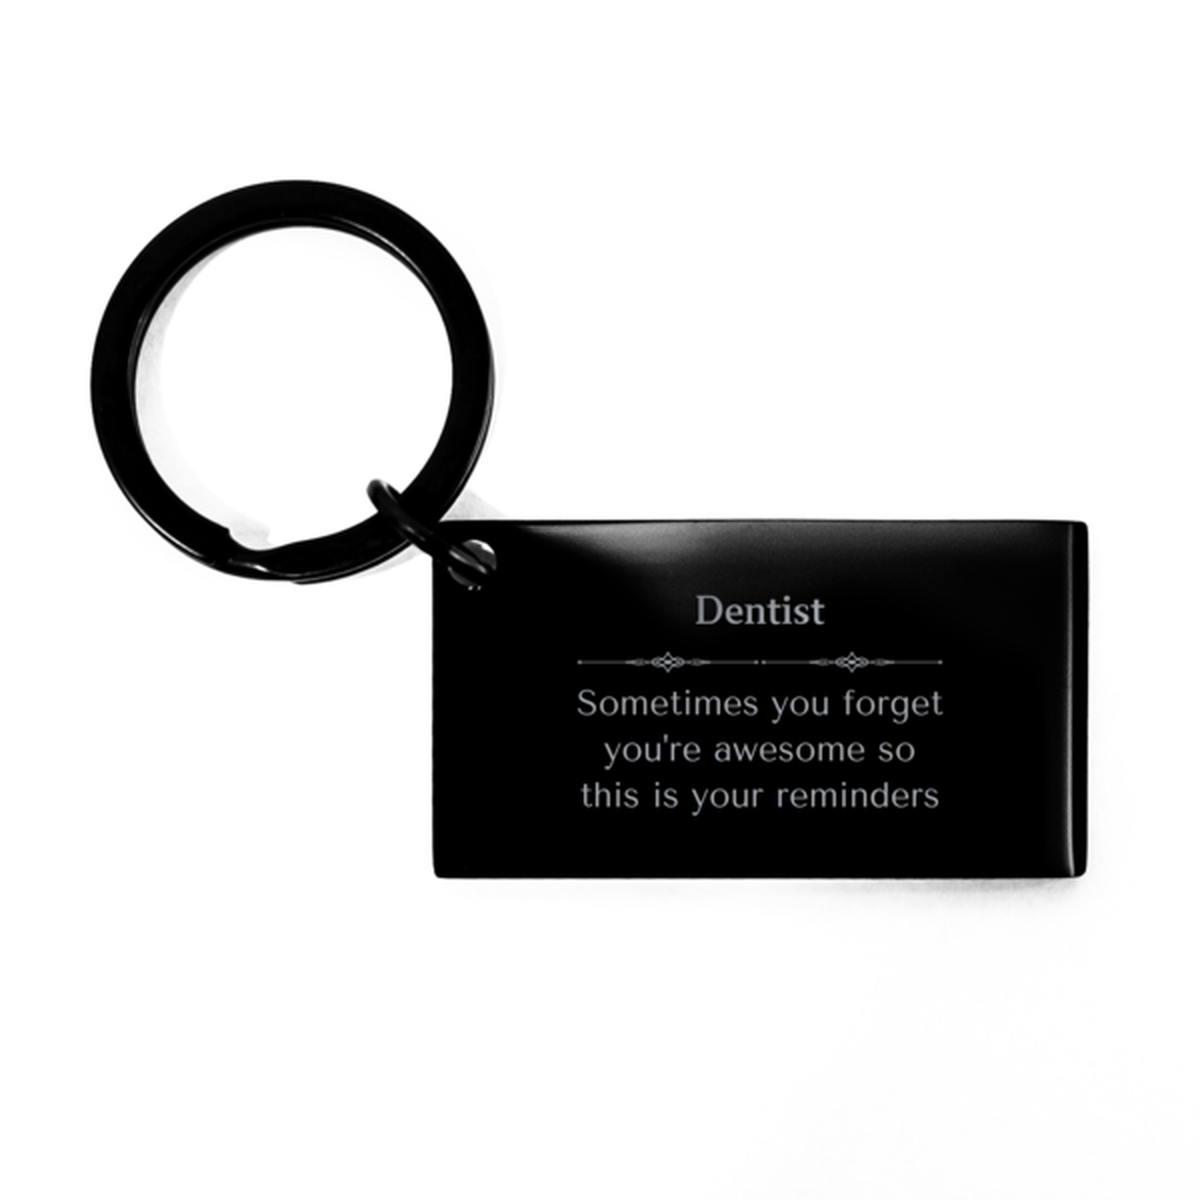 Sentimental Dentist Keychain, General Manager Sometimes you forget you're awesome so this is your reminders, Graduation Christmas Birthday Gifts for Dentist, Men, Women, Coworkers